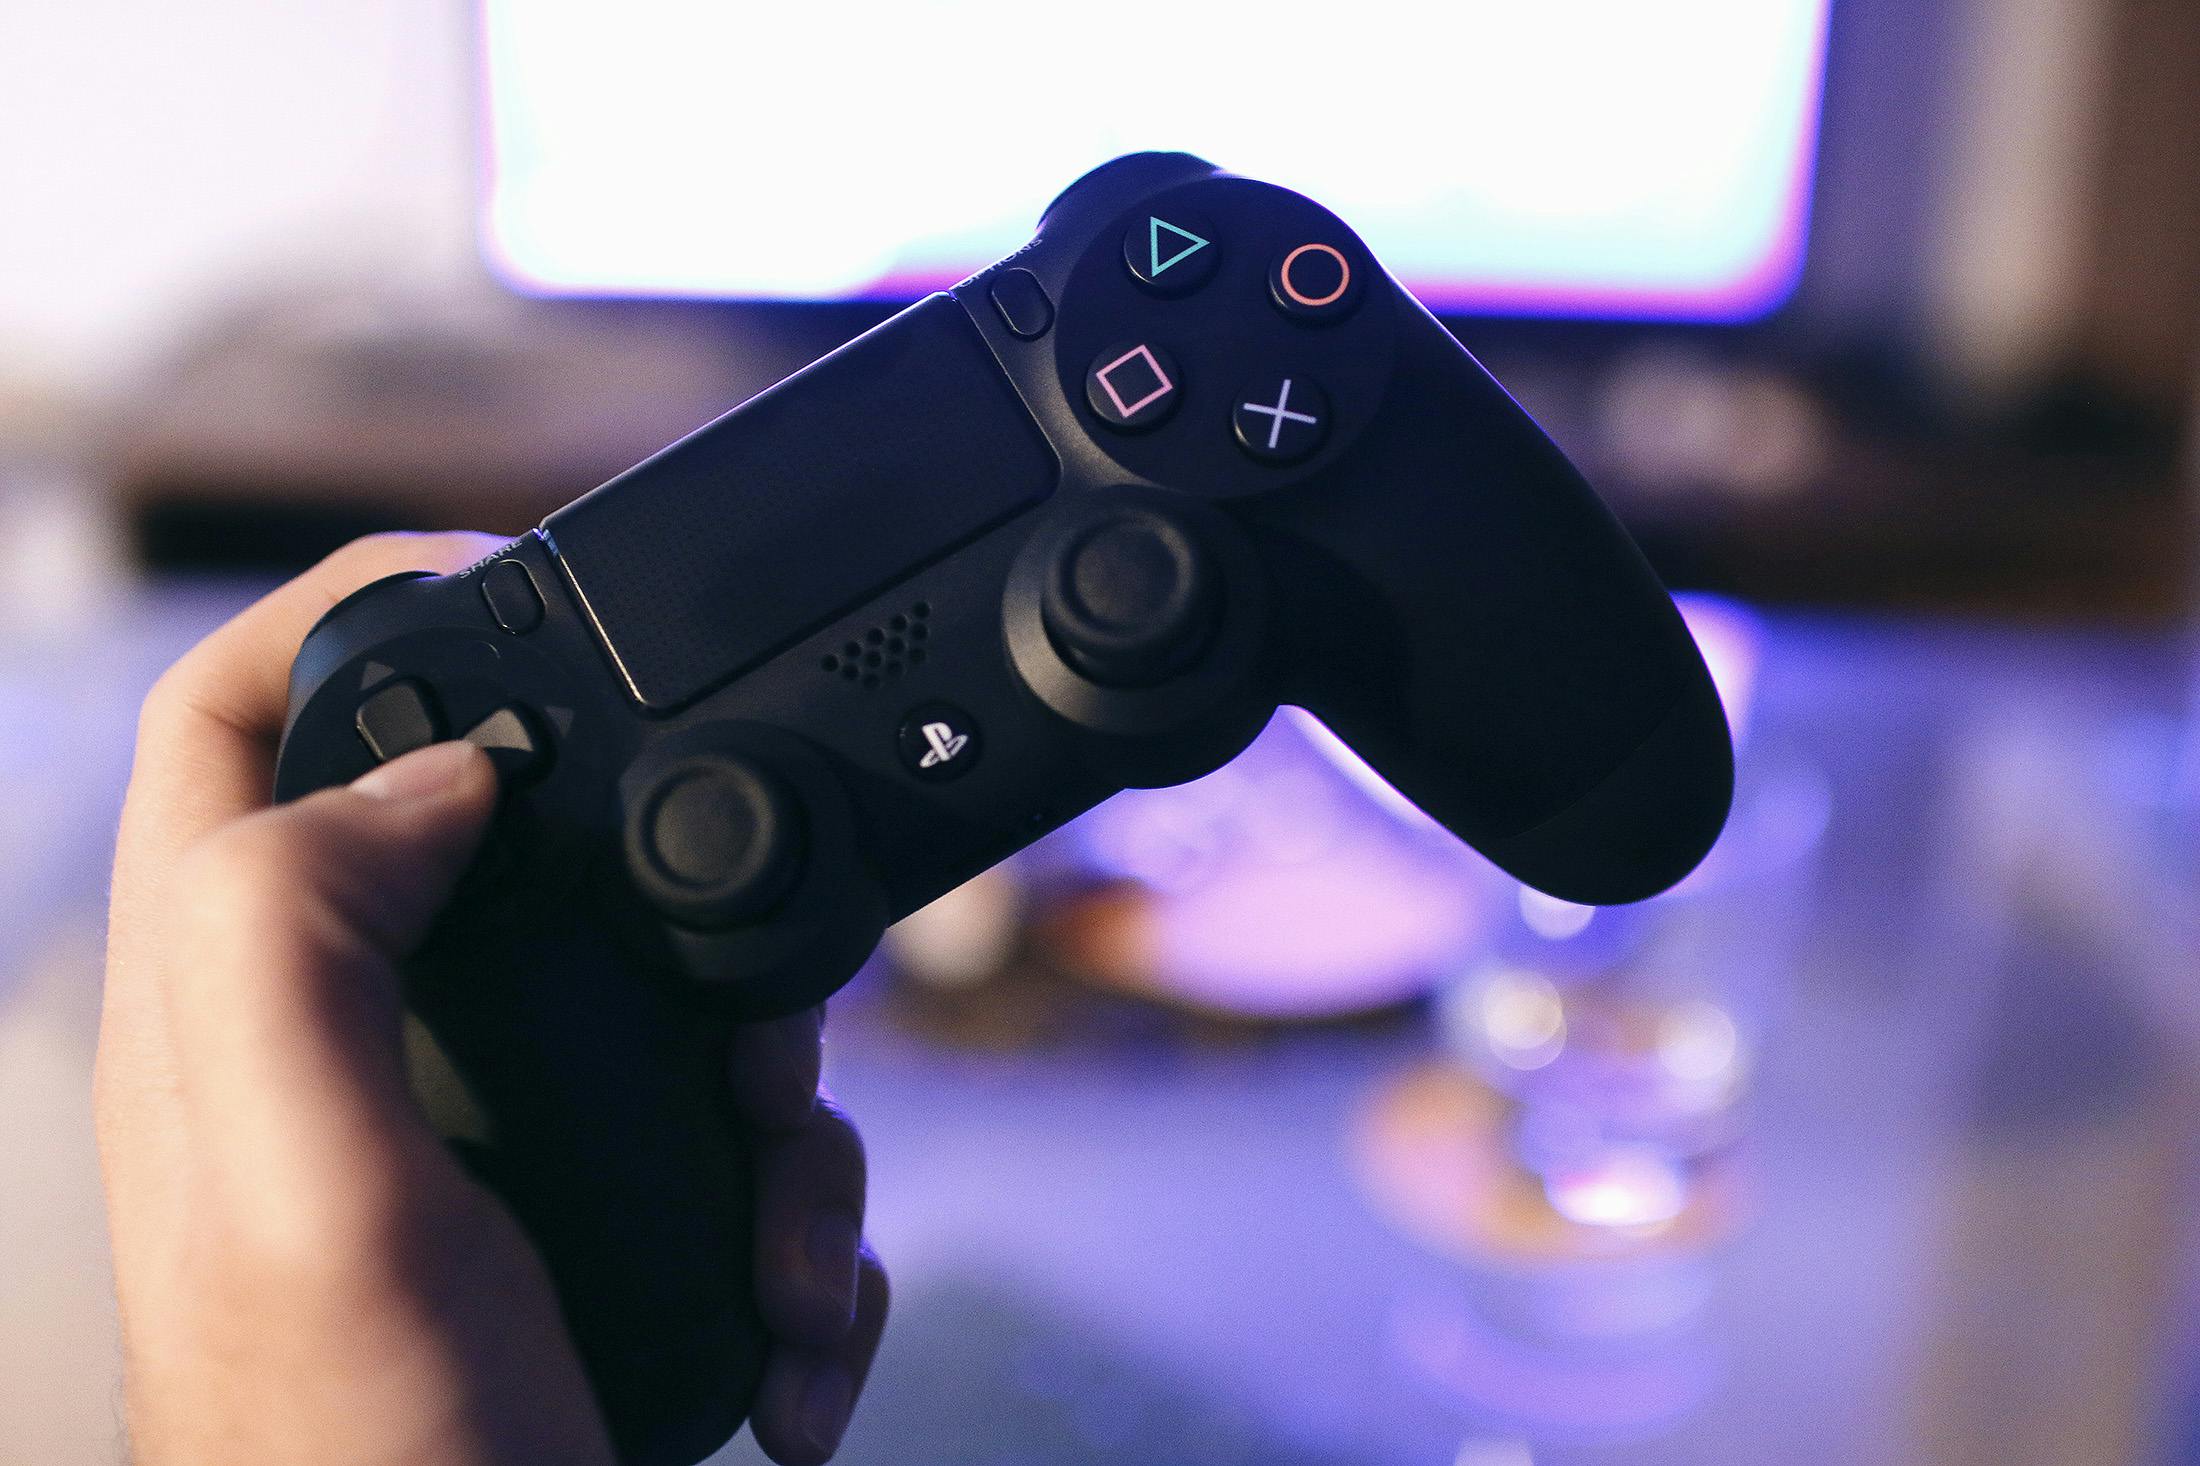 holding a ps4 controller